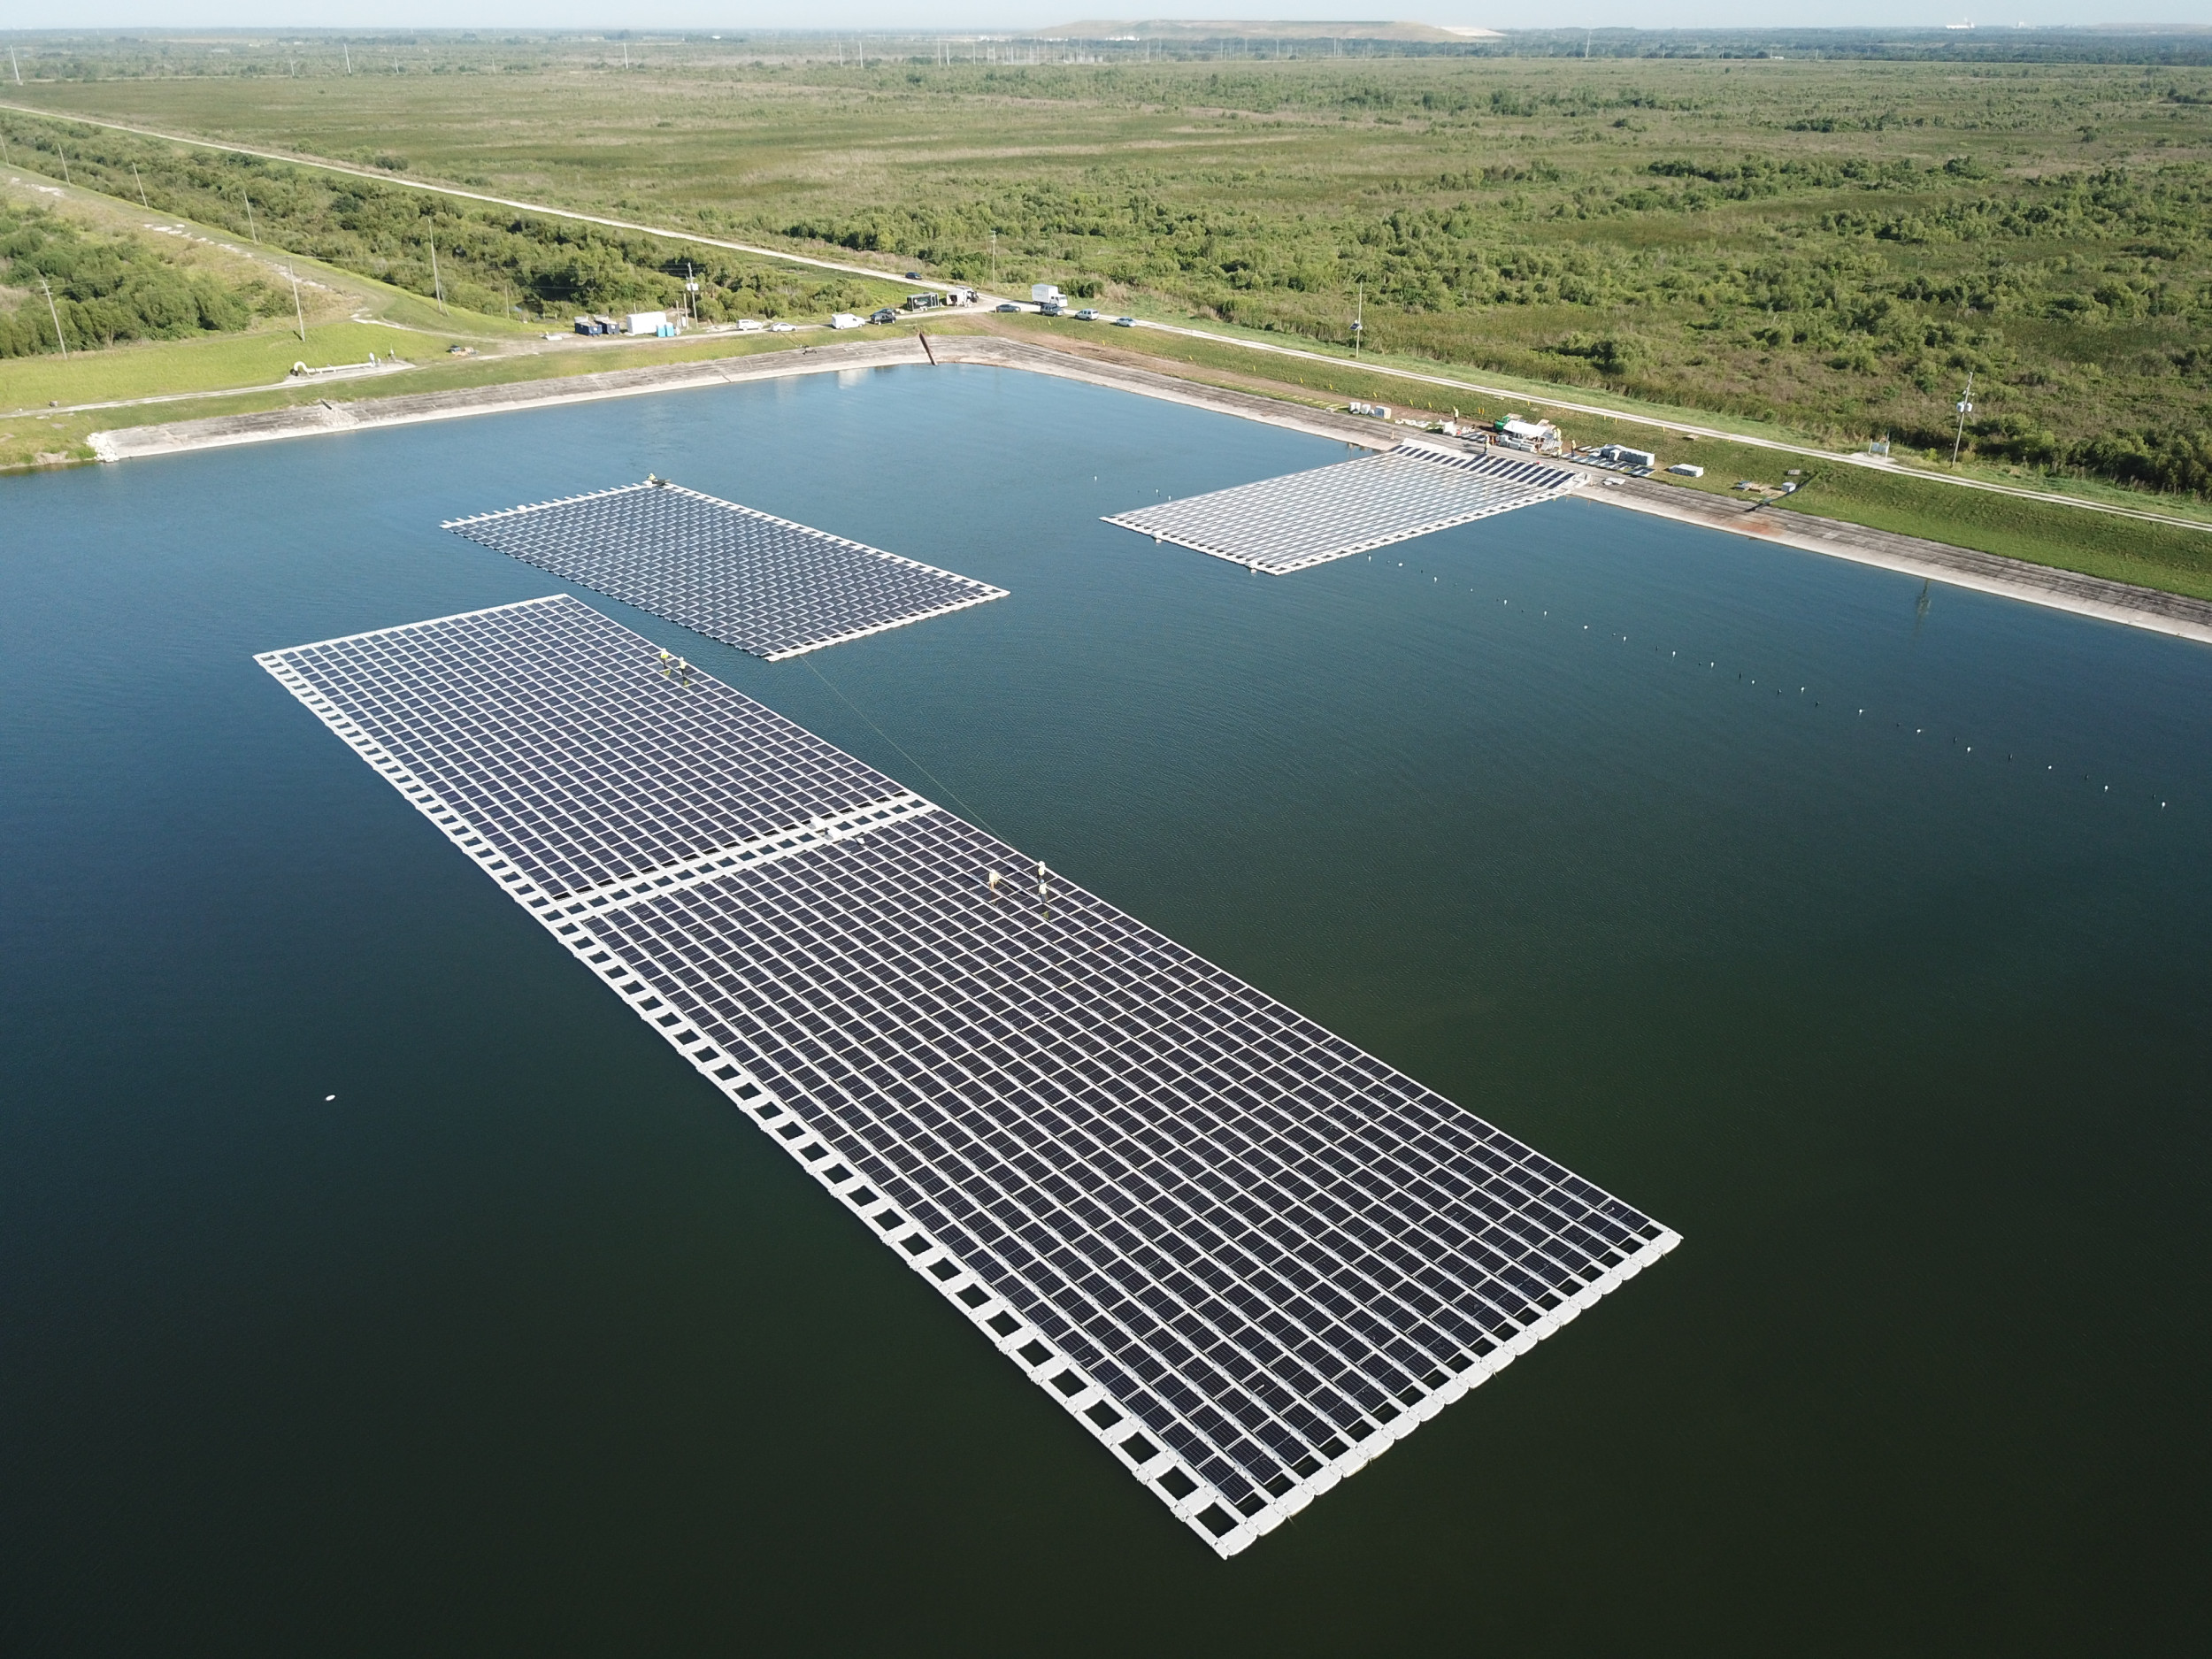 Floating solar panels can supply clean power to spots where land is limited